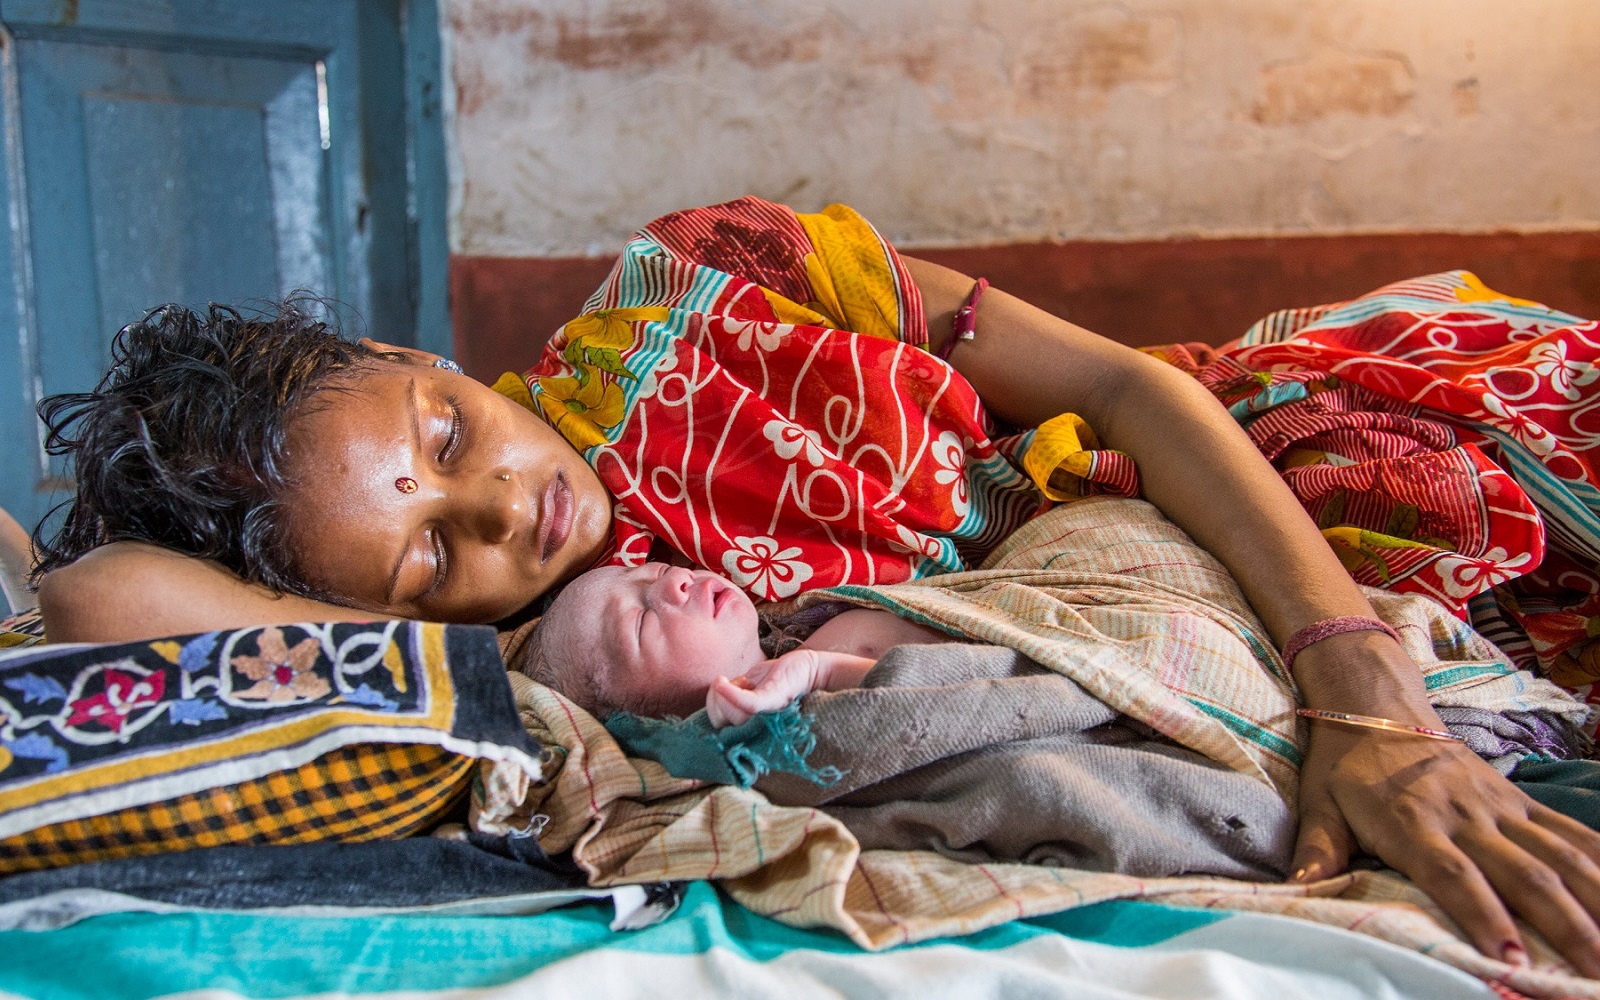 A mother and newborn at a health center in the Patna district of Bihar, India. " (Default Alternate Text: "A mother and newborn at a health center in the Patna district of Bihar, India.